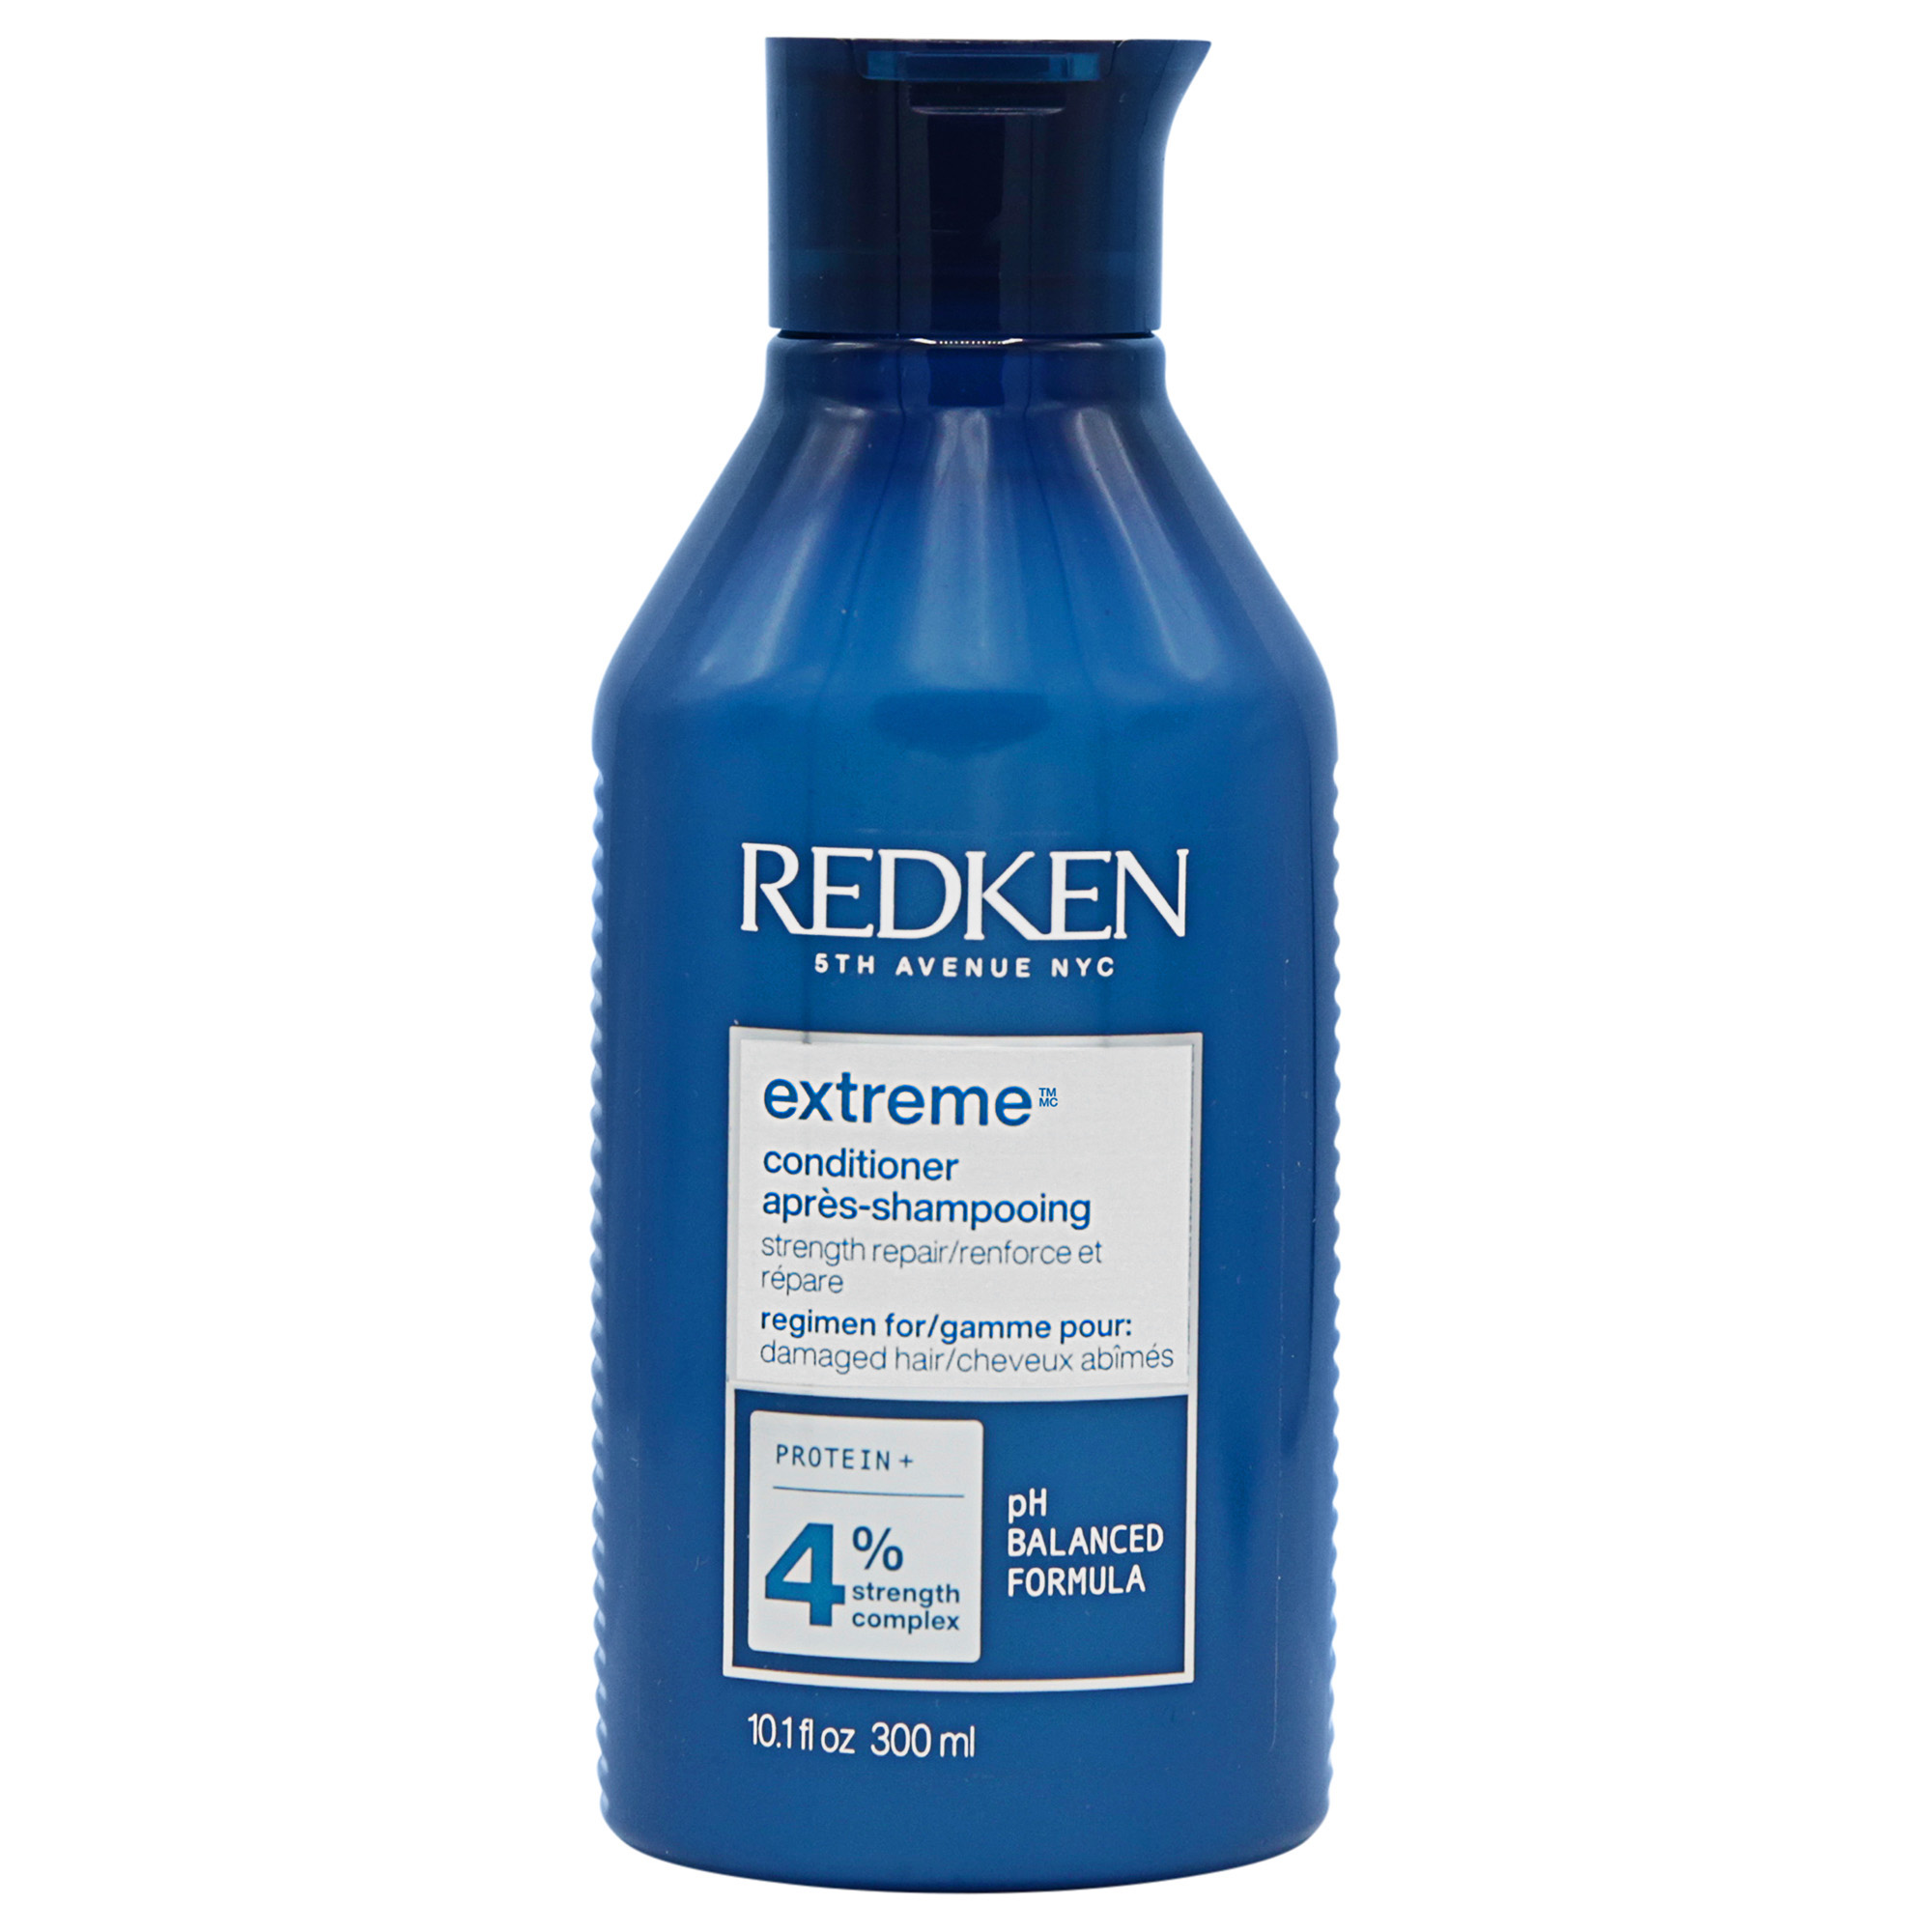 RKN Extreme Conditioner 300ml